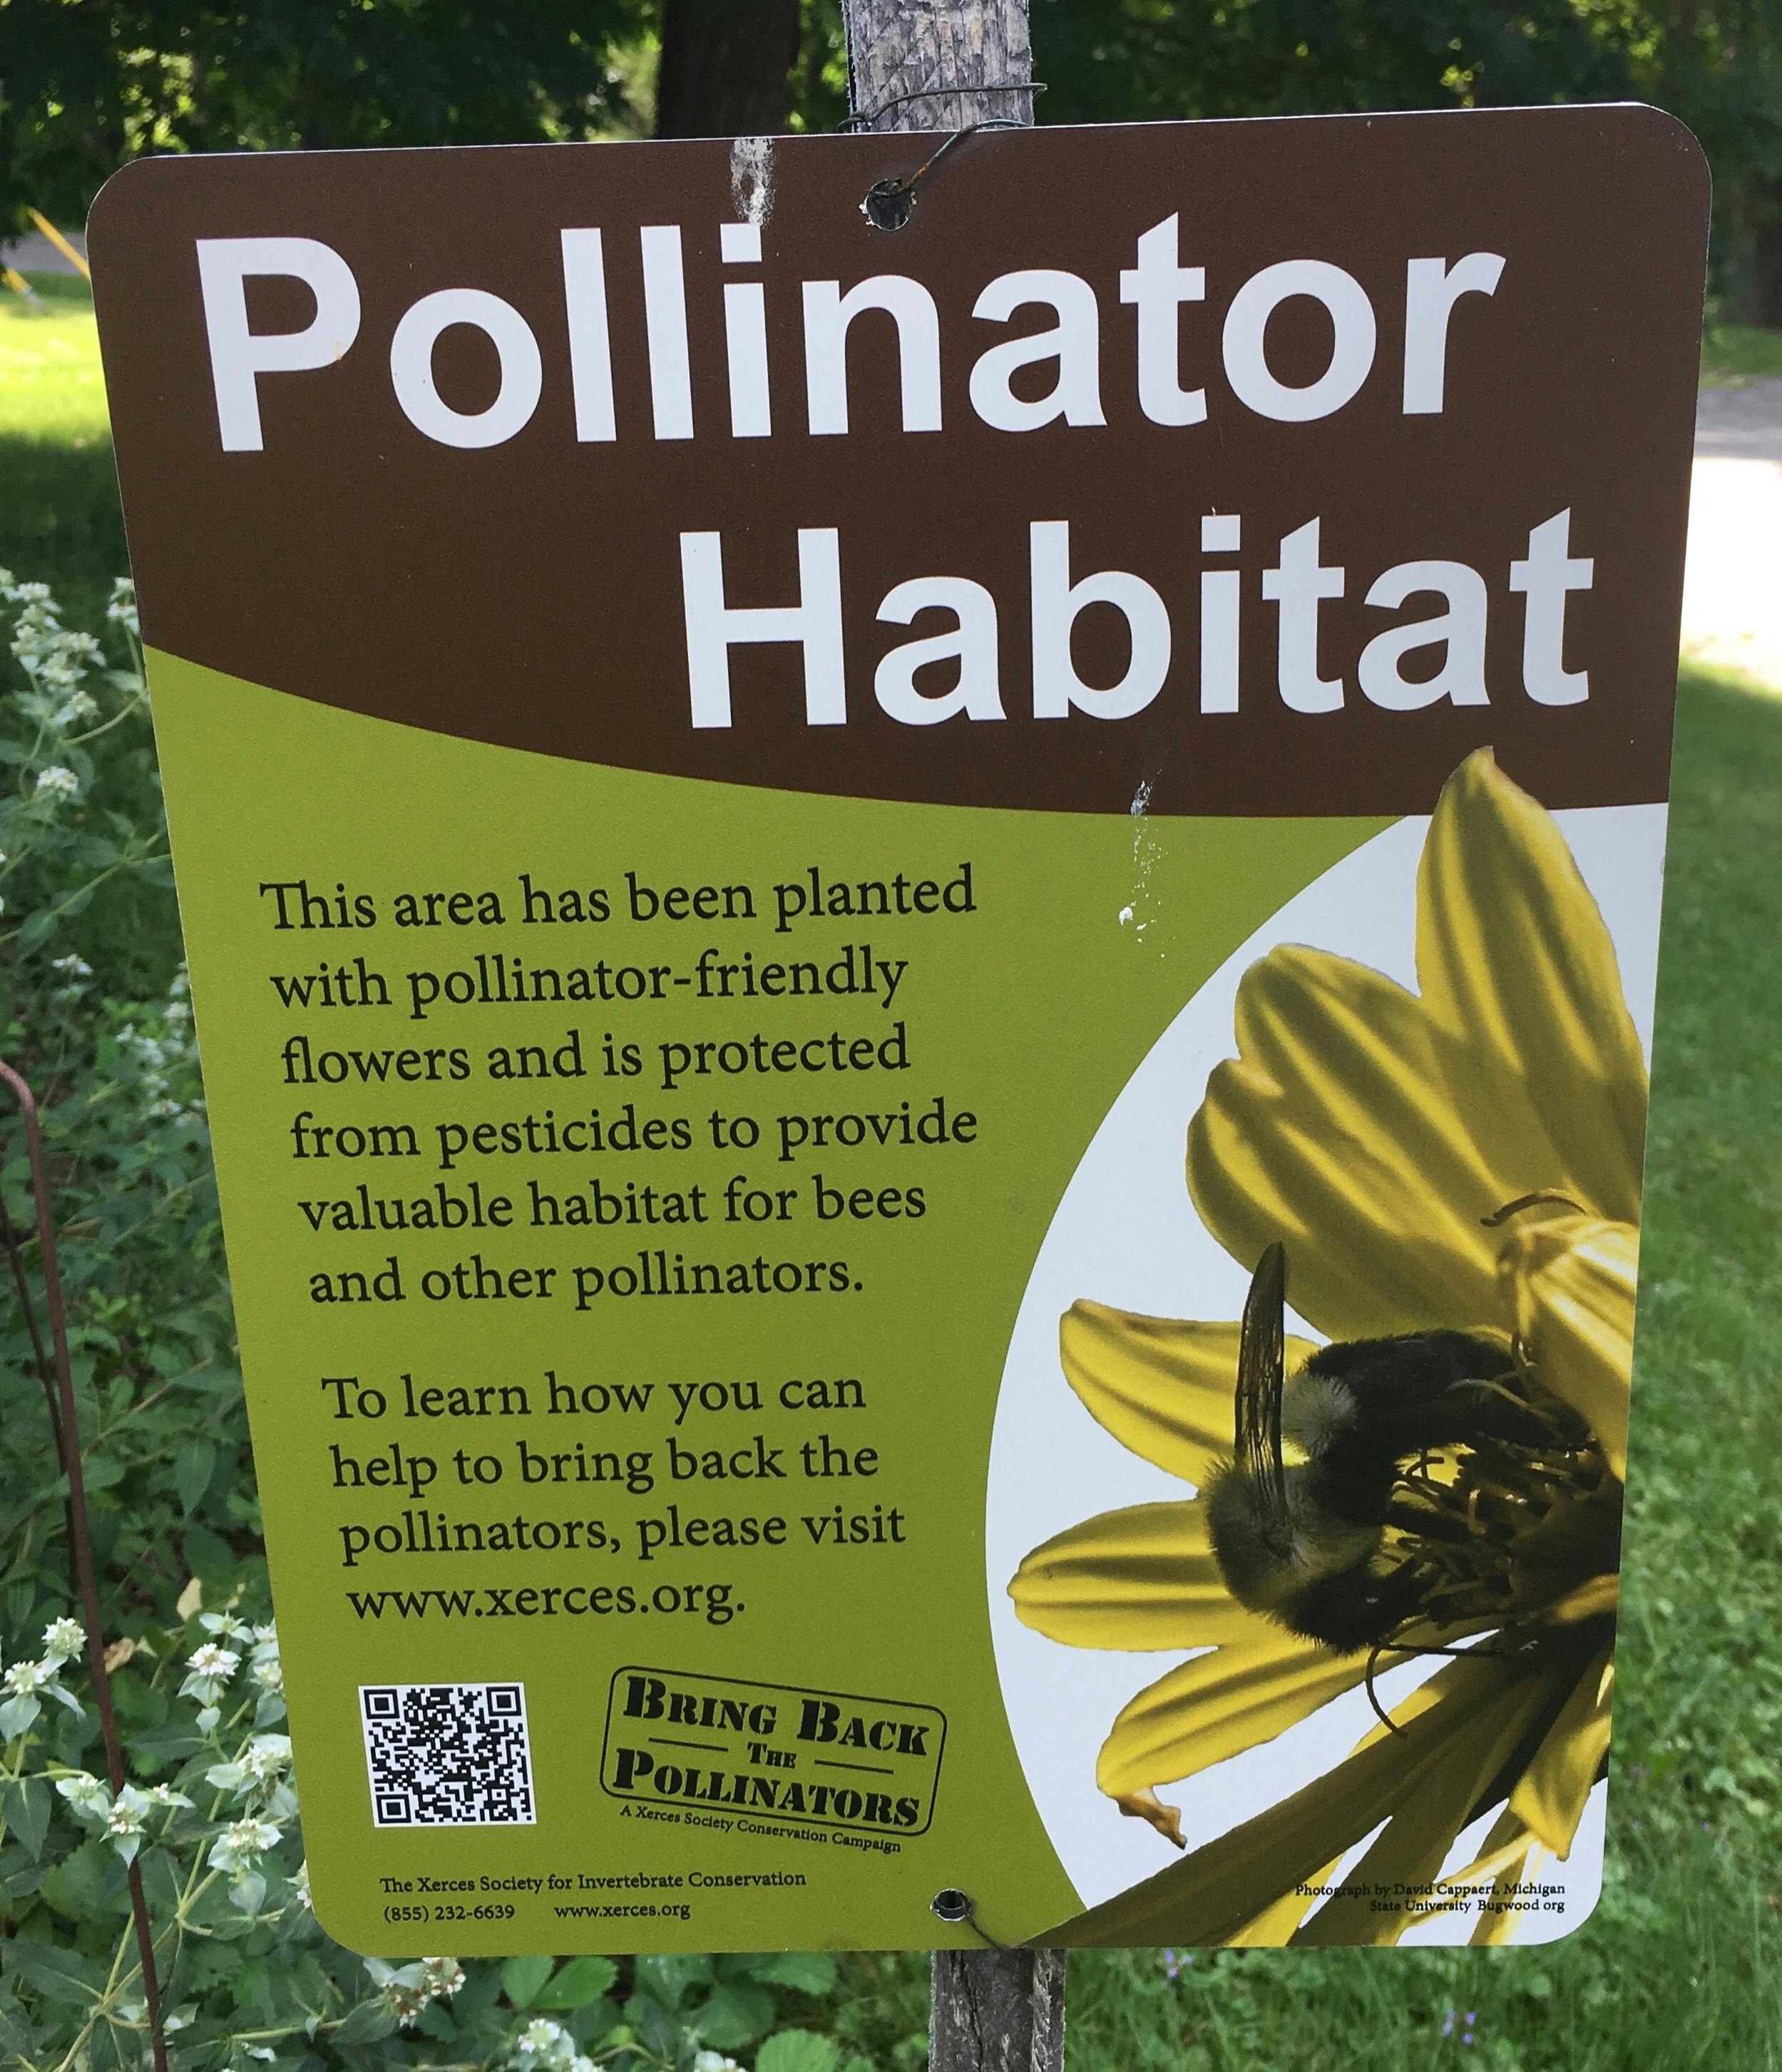 Learn more about pollinators at Xerces.org